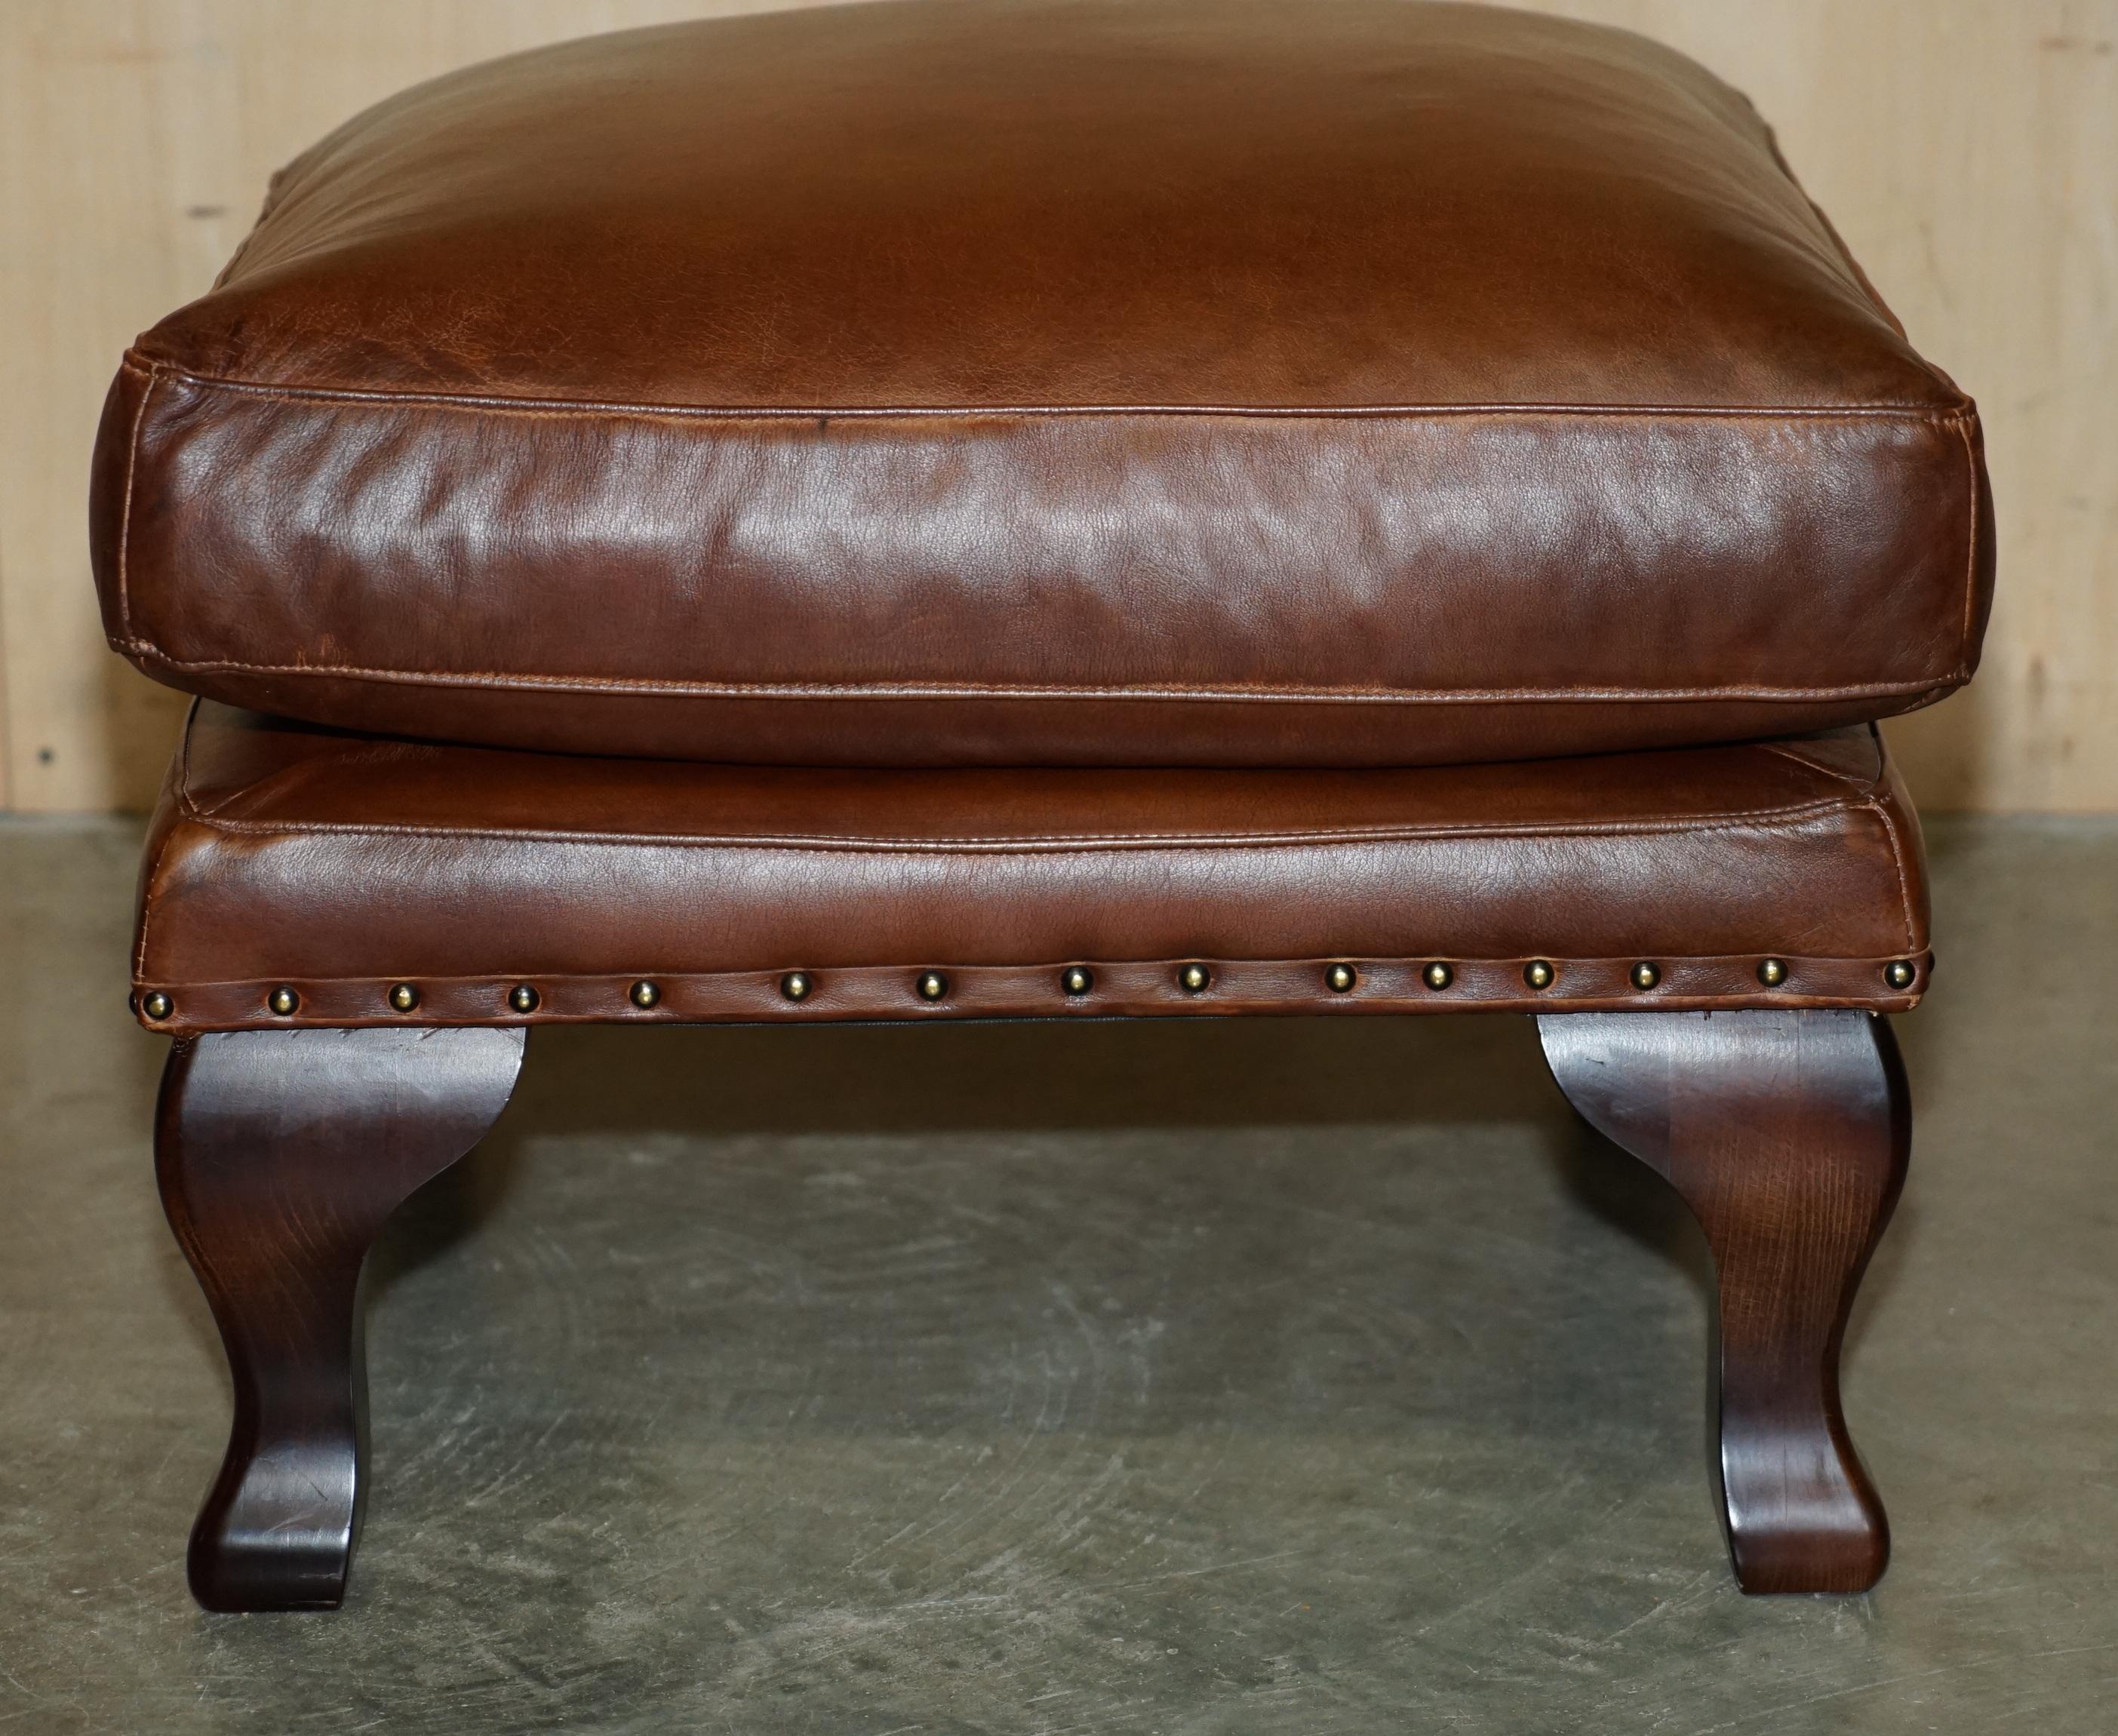 TETRAD BROWN LEATHER LARGE FOOTSTOOL LARGE ENoUGH FOR TWO PEOPLE TO SHARE For Sale 2